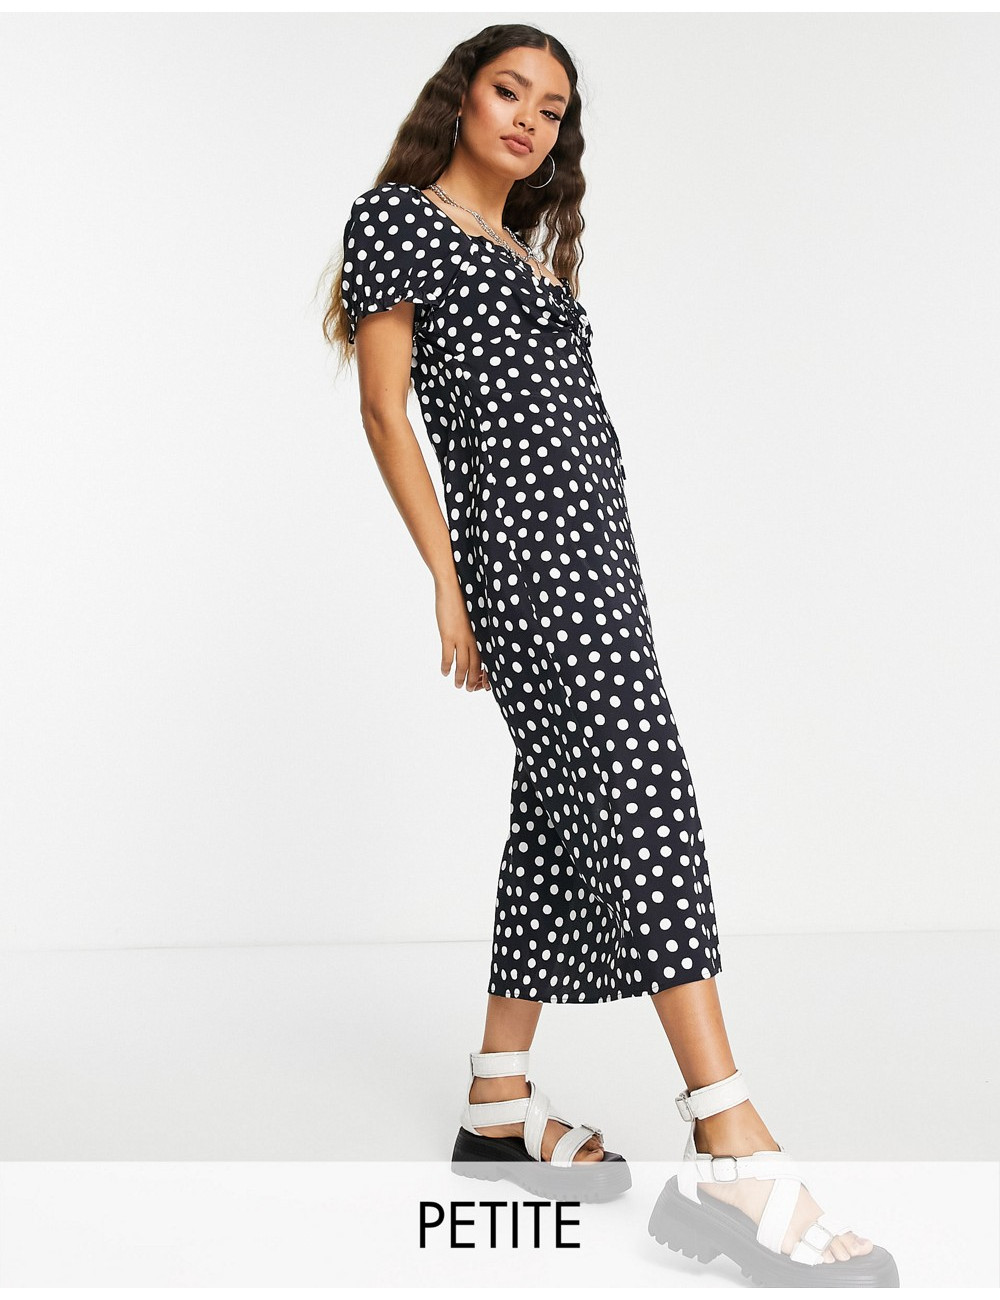 Topshop Petite sustainable...